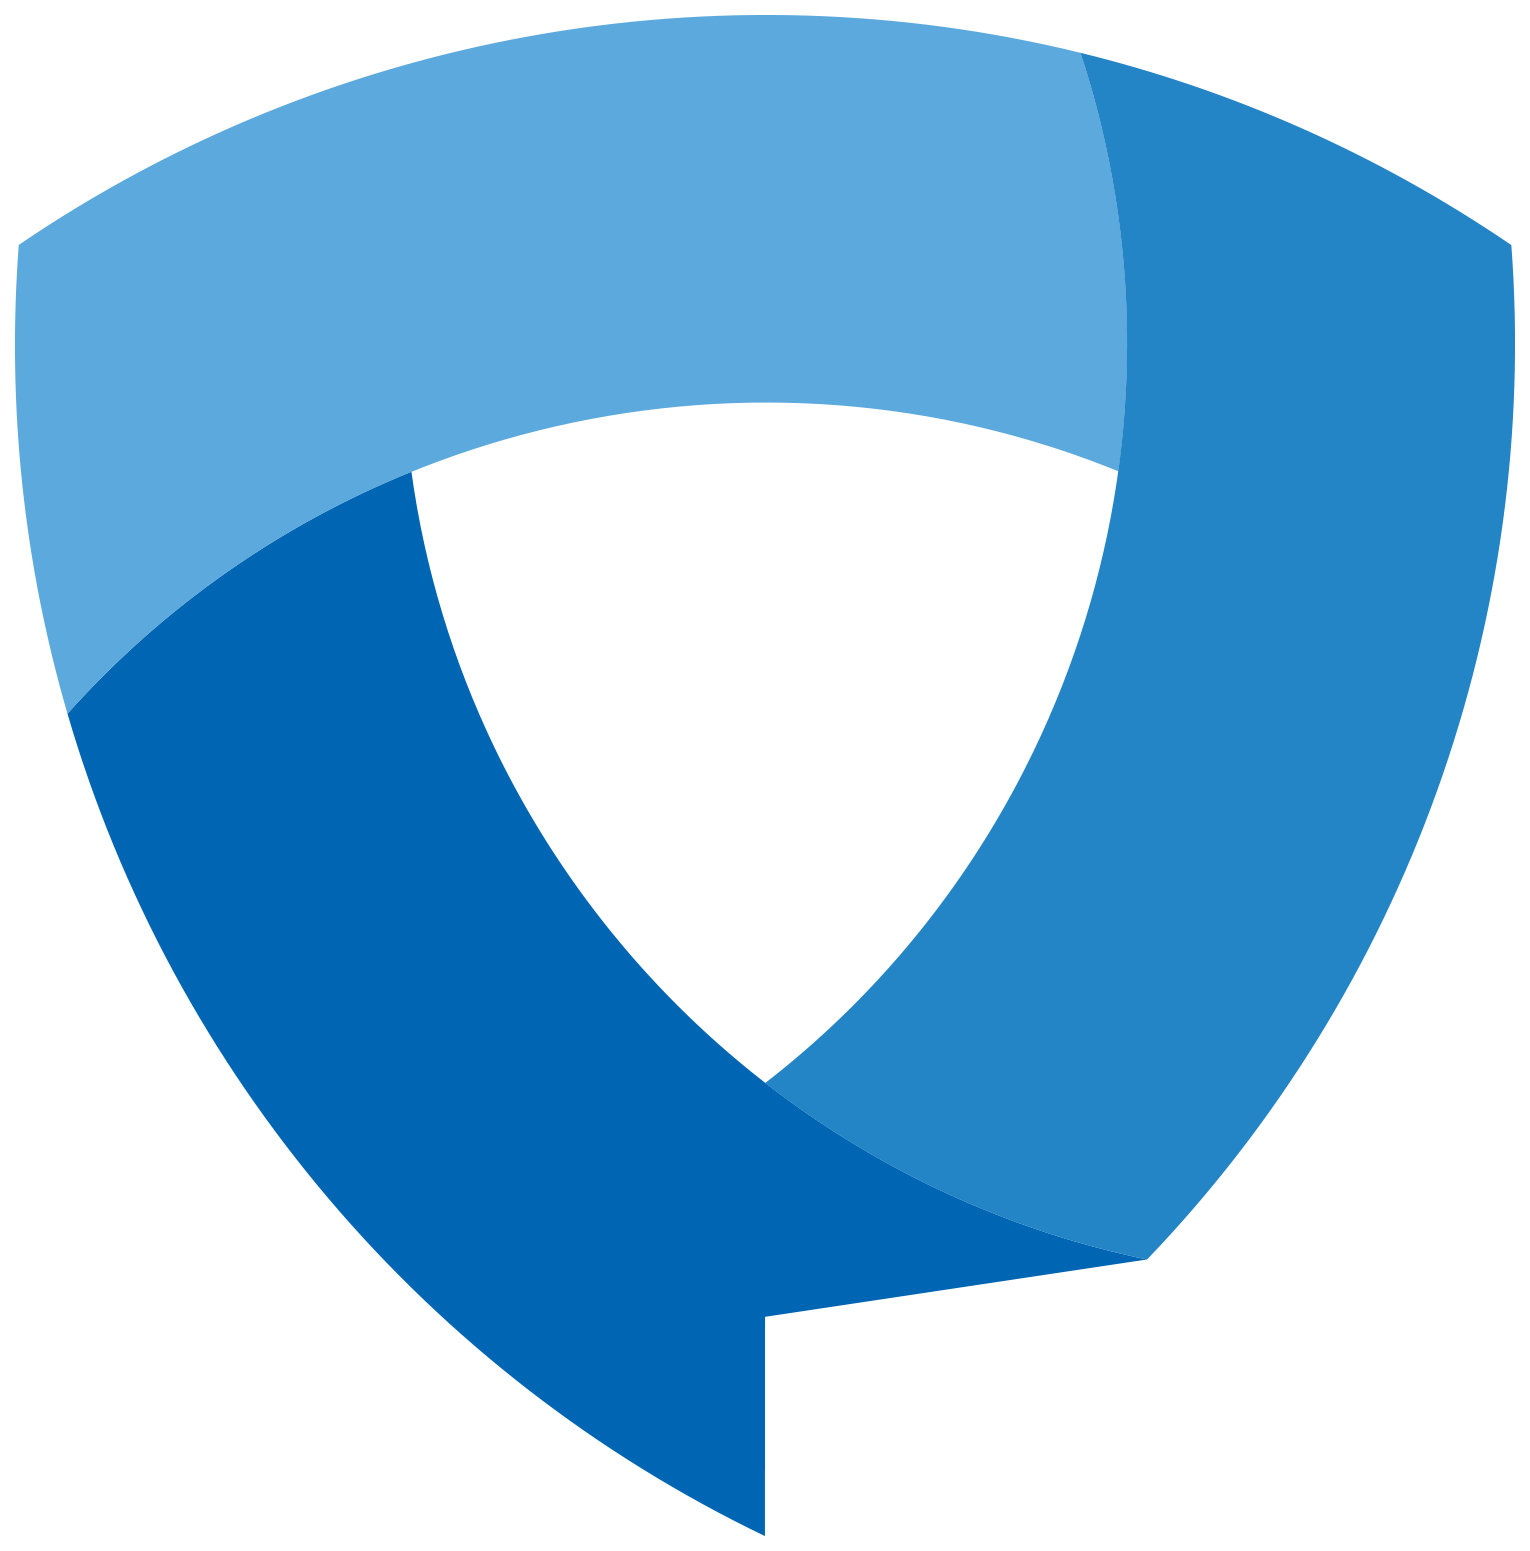 The Cybersecurity Awareness Month logo